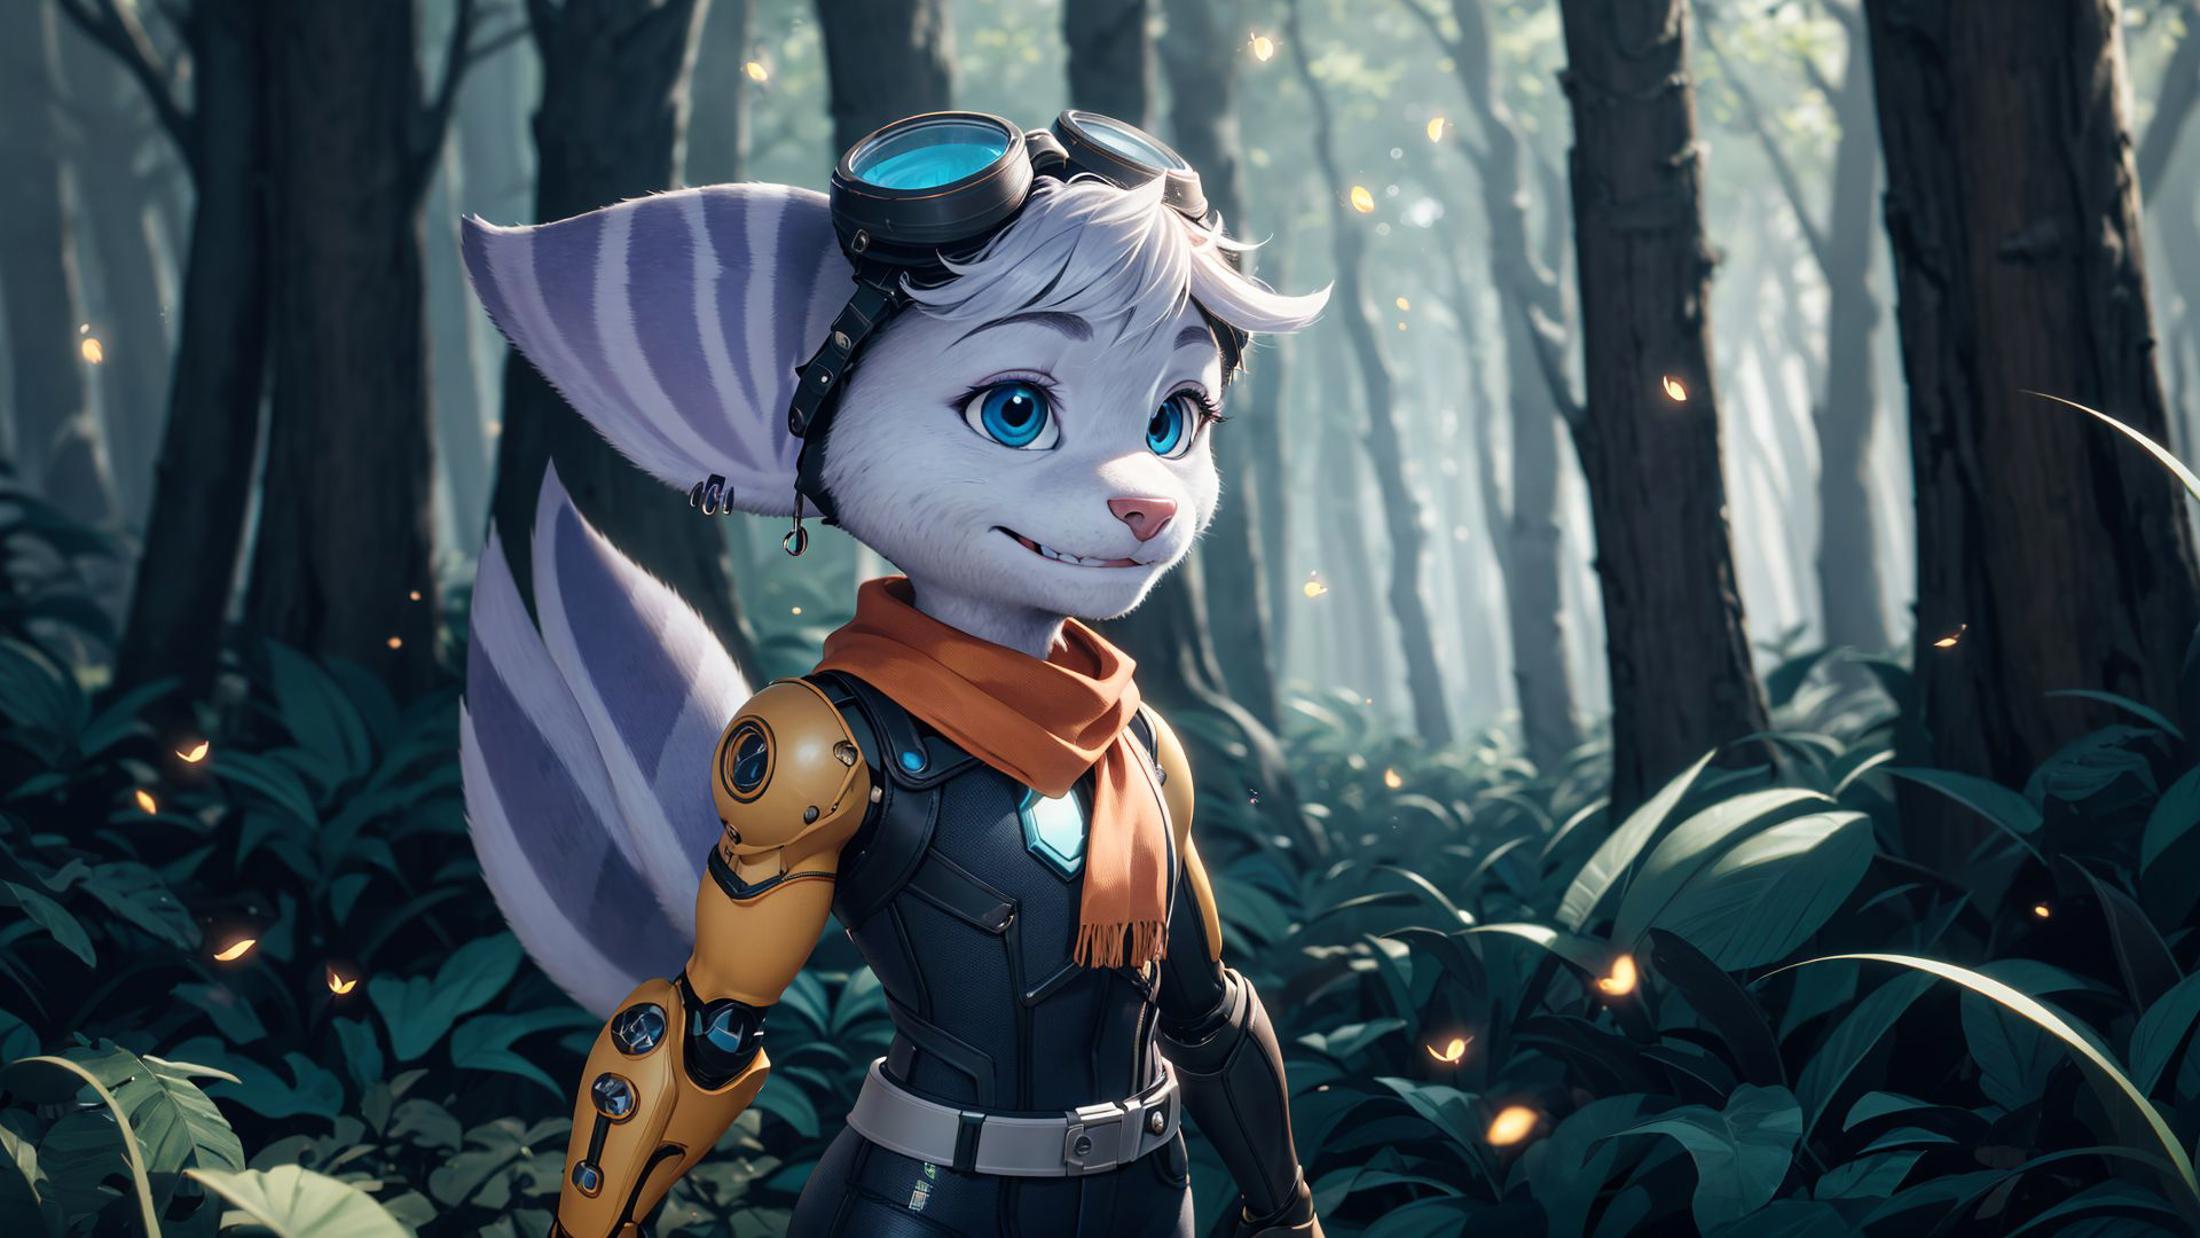 Rivet (Ratchet and Clank) image by marusame